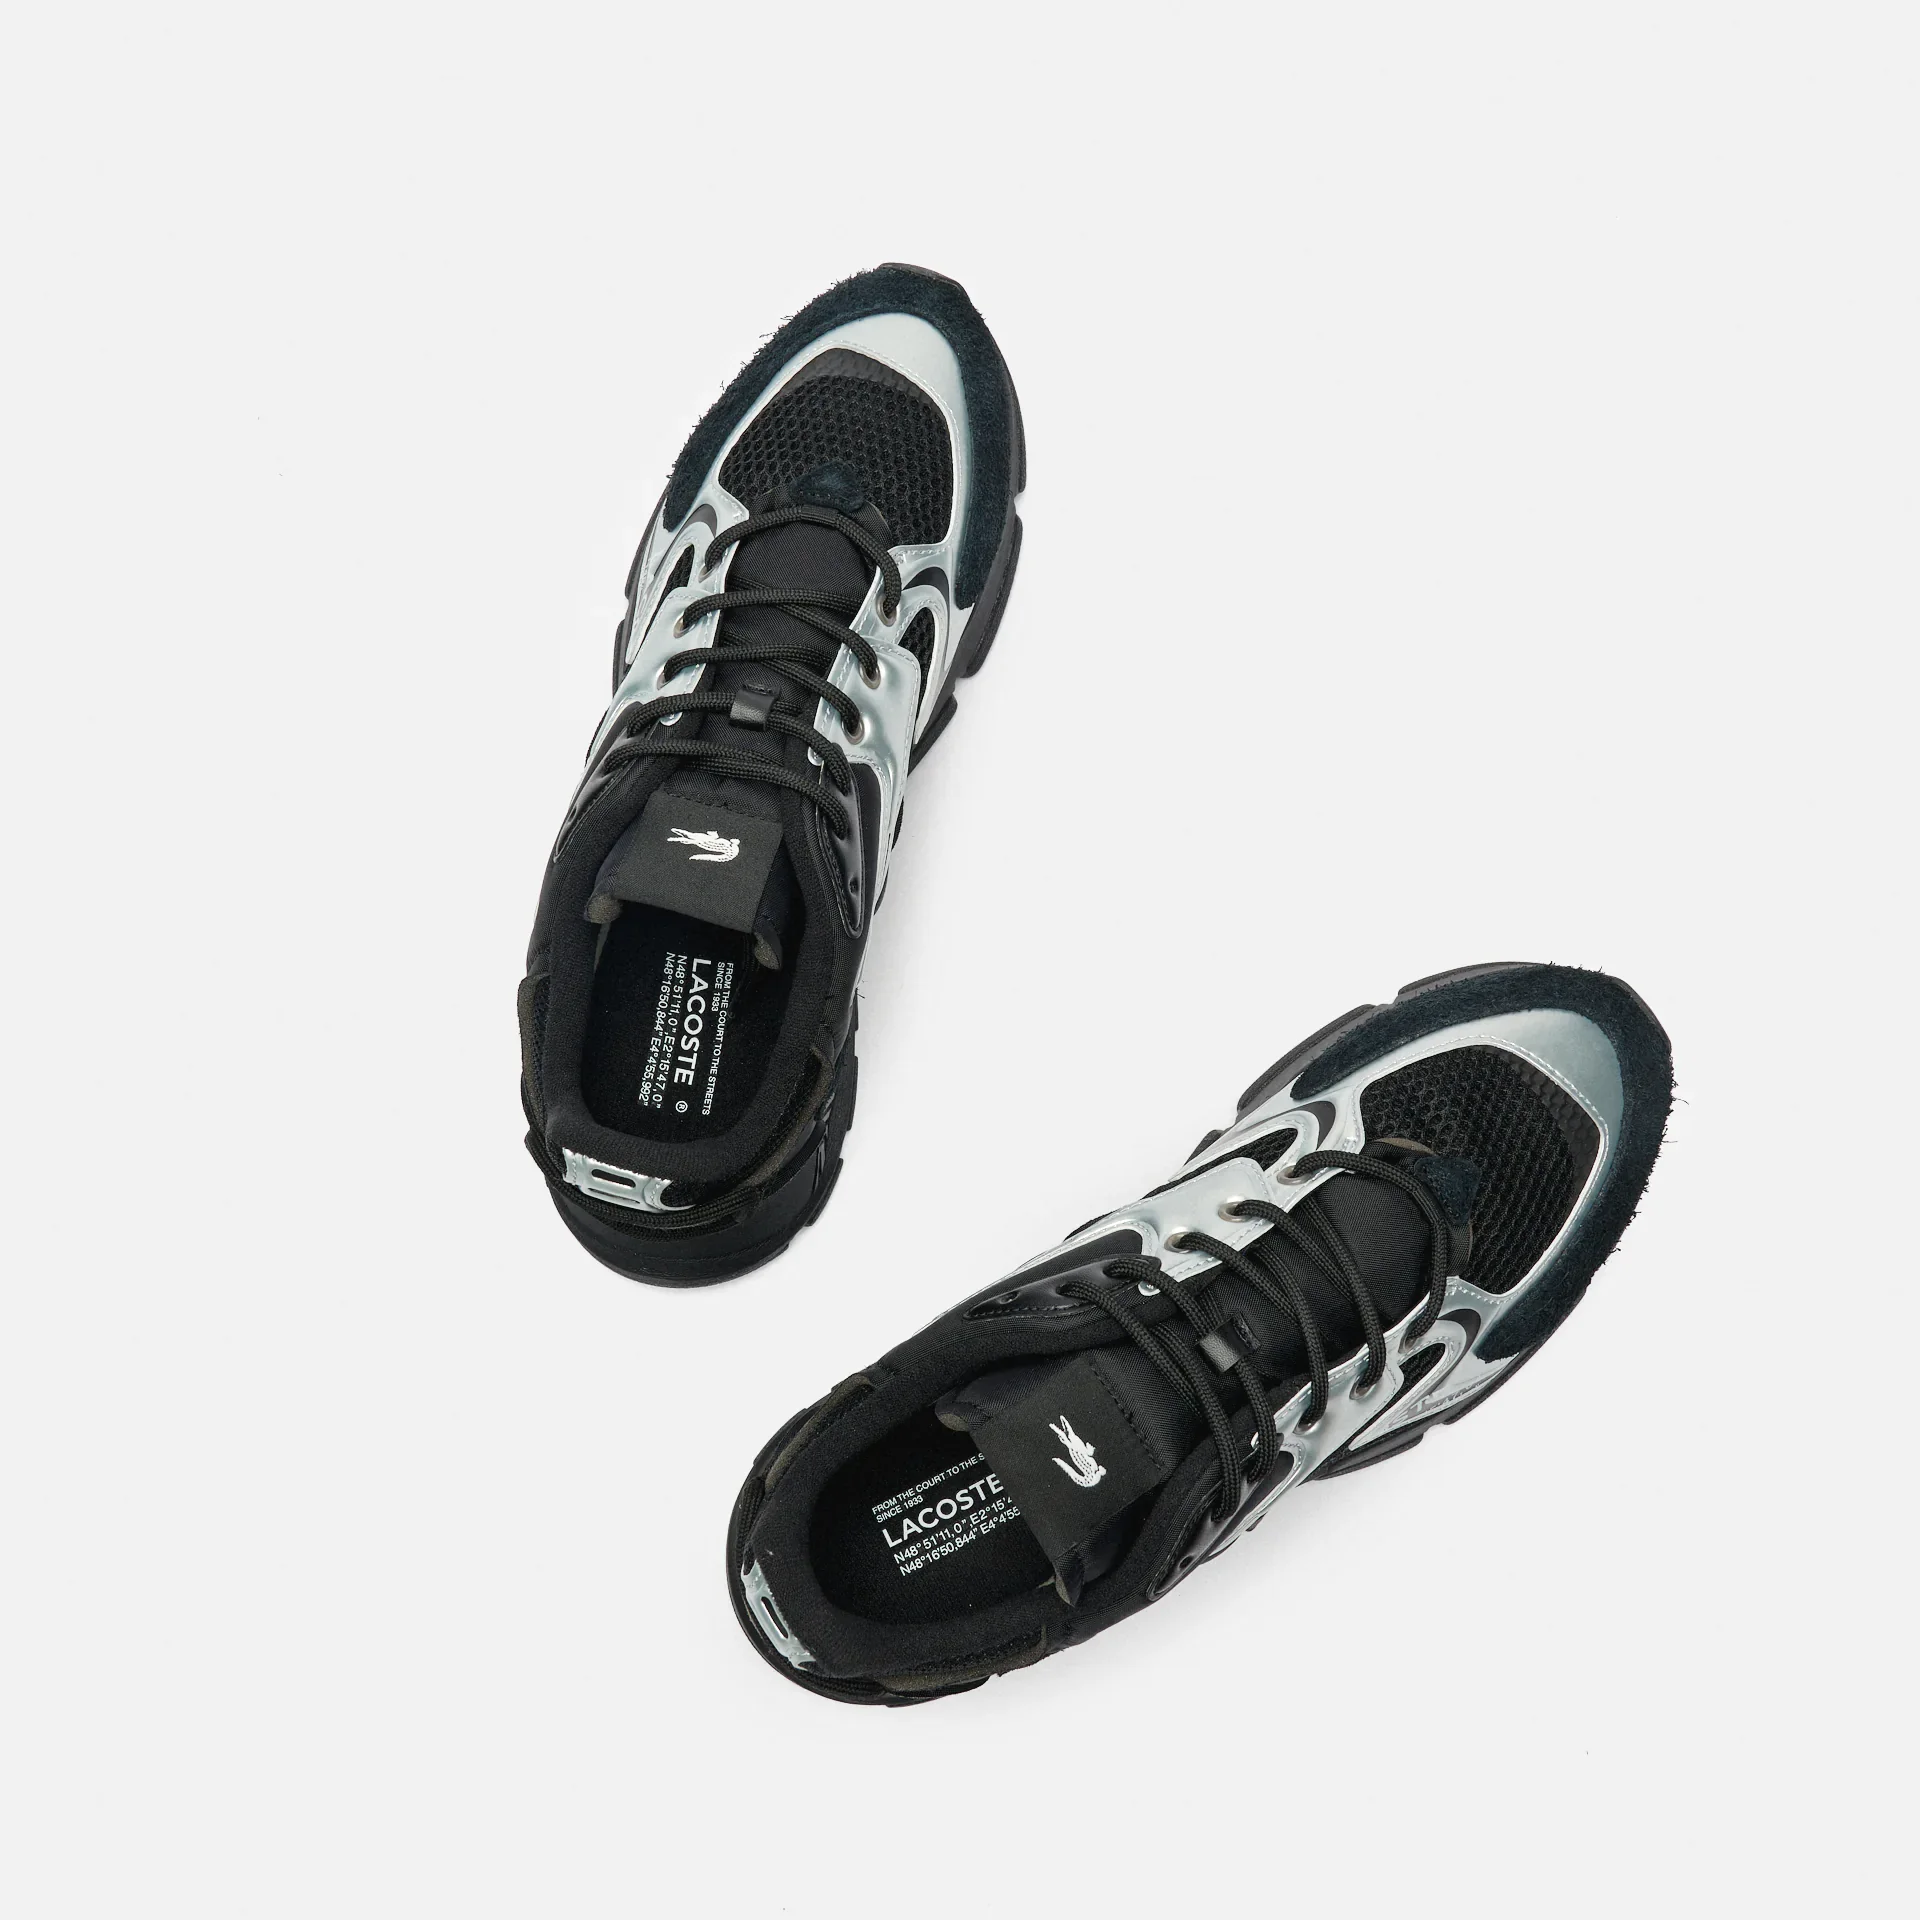 Lacoste L003 Neo Contrasted Textile Sneaker Black/White